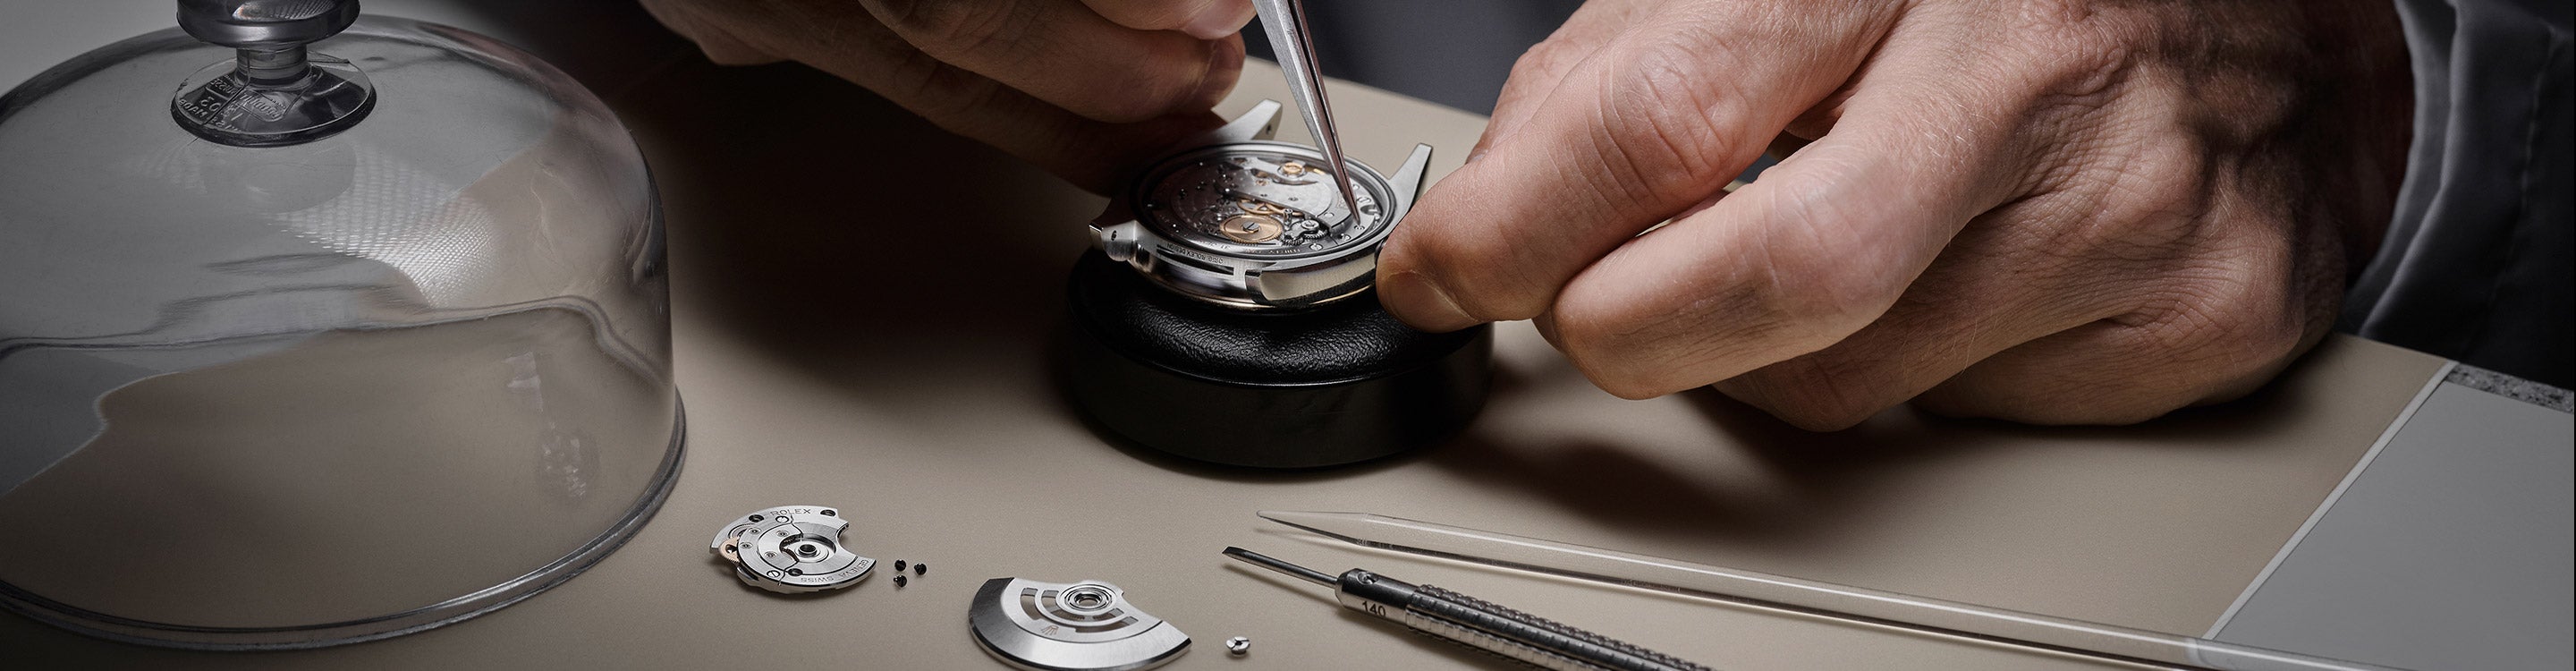 Rolex Servicing Watch Assembly at Fink's Jewelers